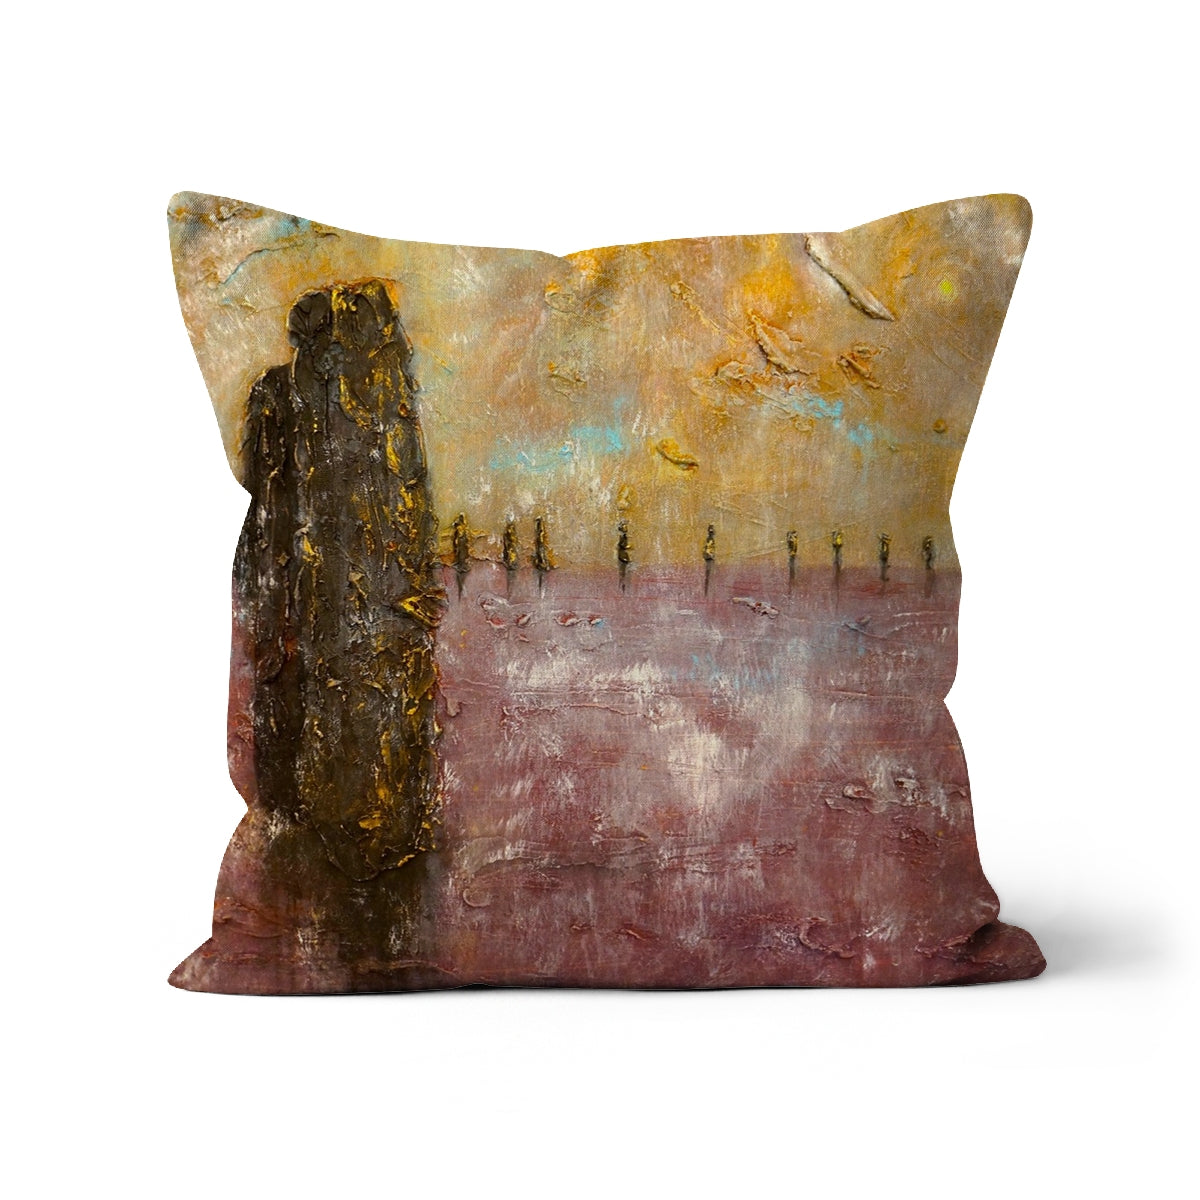 Brodgar Mist Orkney Art Gifts Cushion-Cushions-Orkney Art Gallery-Canvas-18"x18"-Paintings, Prints, Homeware, Art Gifts From Scotland By Scottish Artist Kevin Hunter